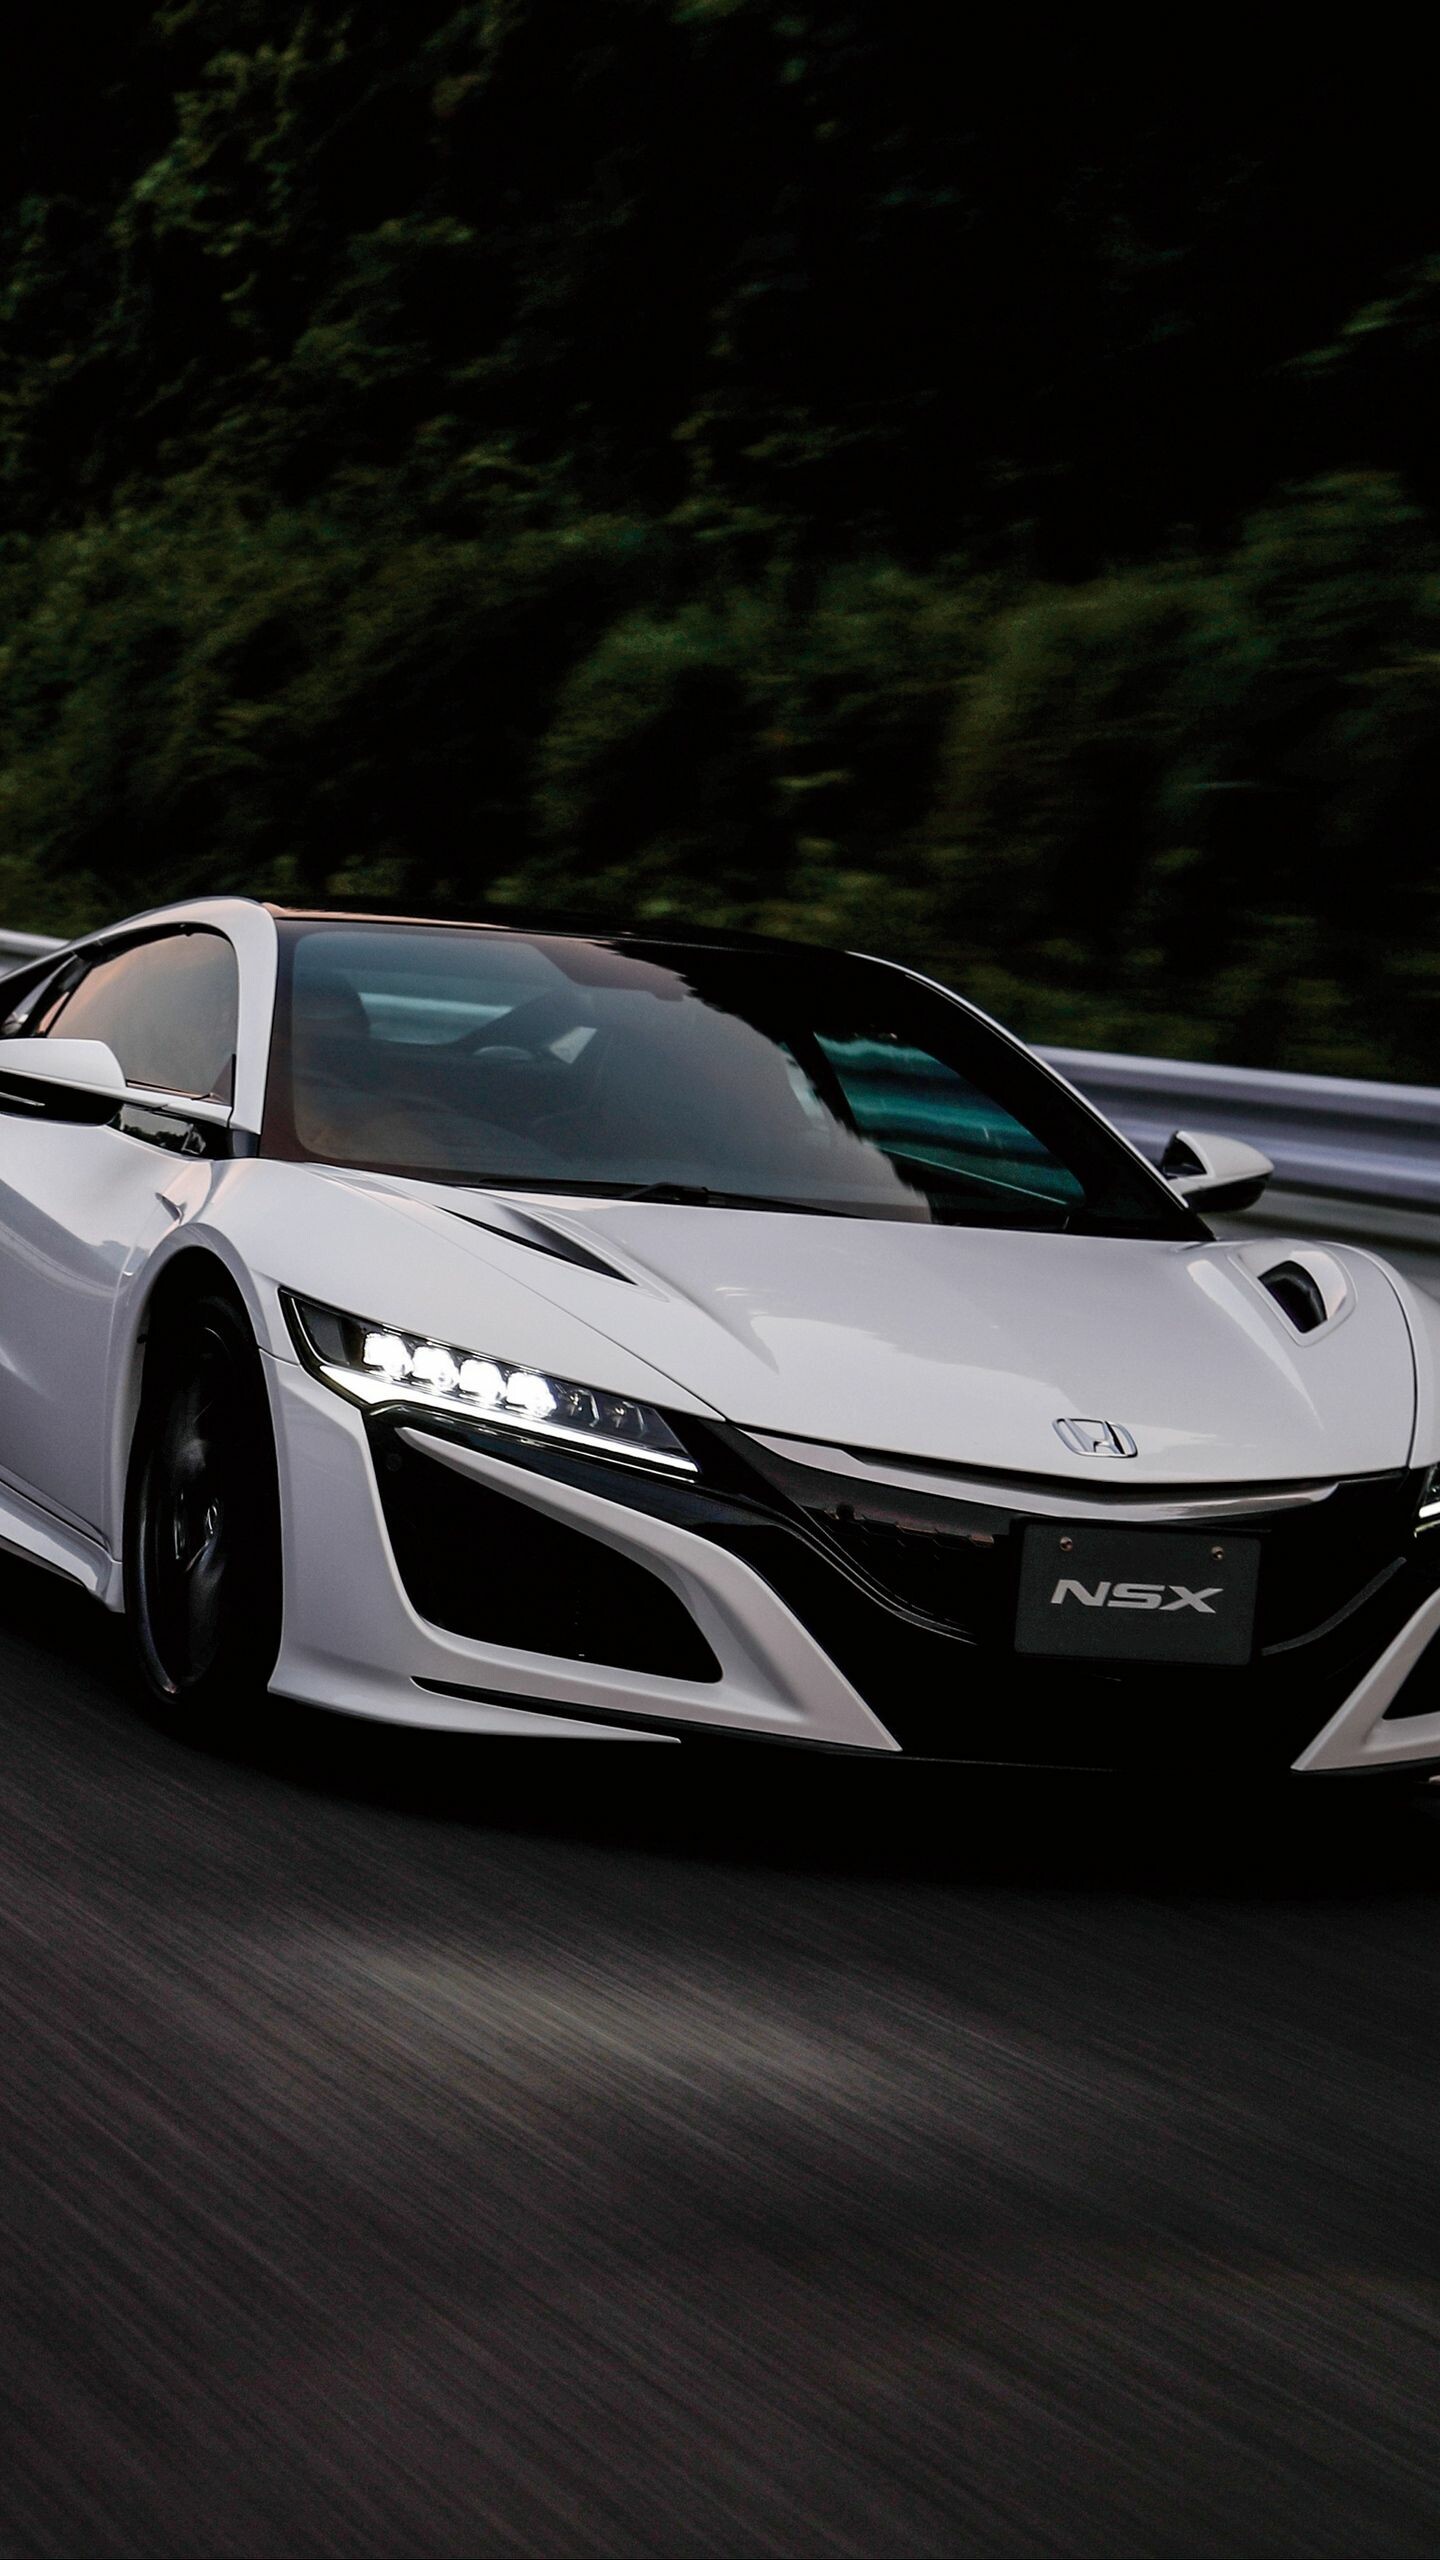 Acura: Launched in 1986 by its parent company, Honda, Galaxy. 1440x2560 HD Wallpaper.